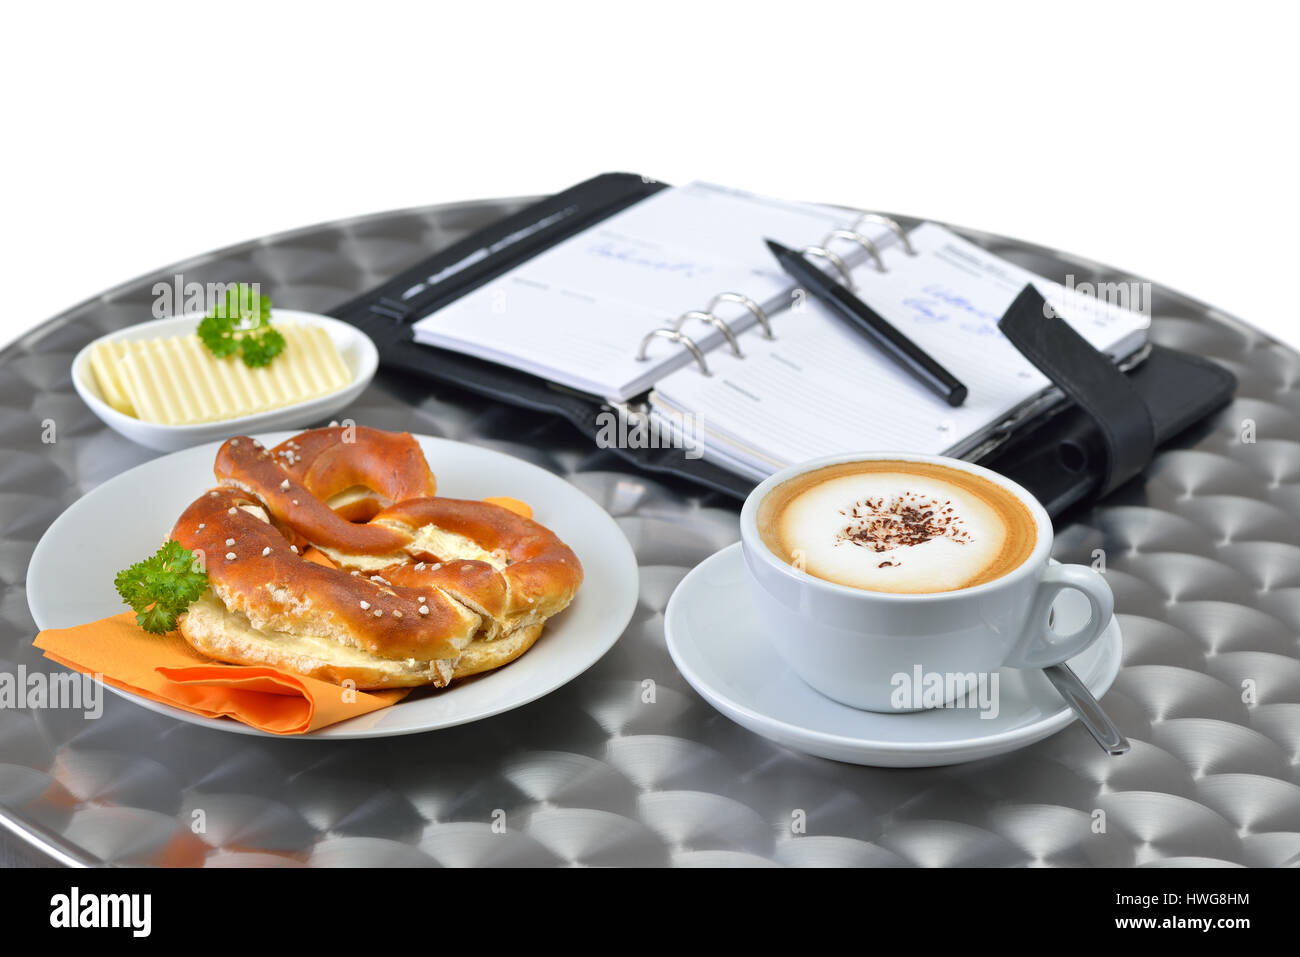 Business break with a pretzel, butter and a cup of cappuccino; a personal organizer in the background Stock Photo